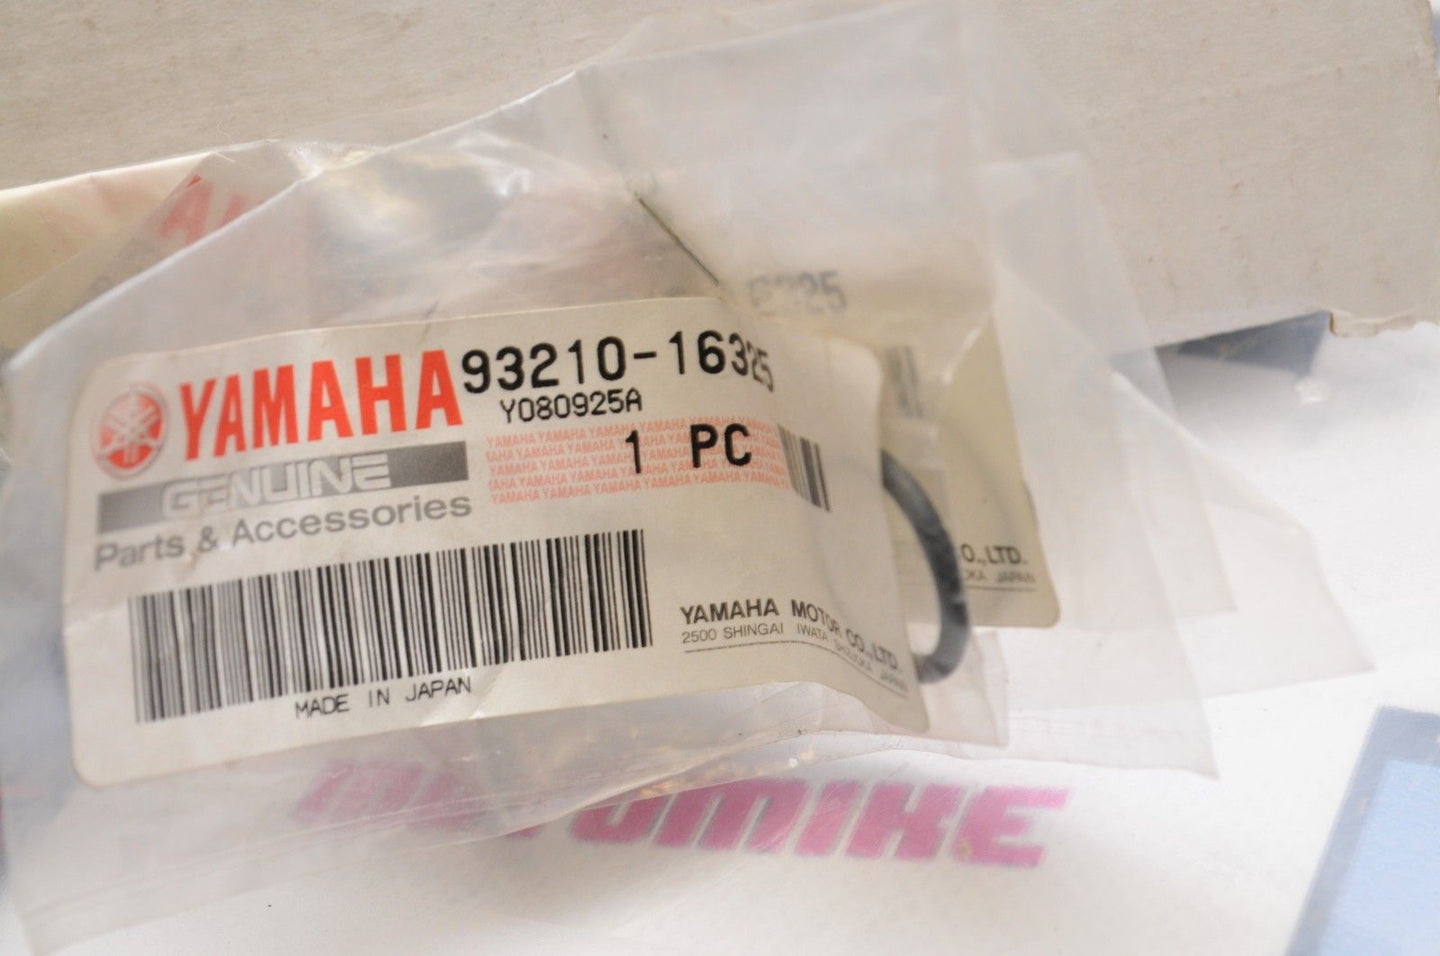 NEW NOS OEM YAMAHA 93210-16325 Qty:4  O-RING RINGS - (OIL COOLER) LOT